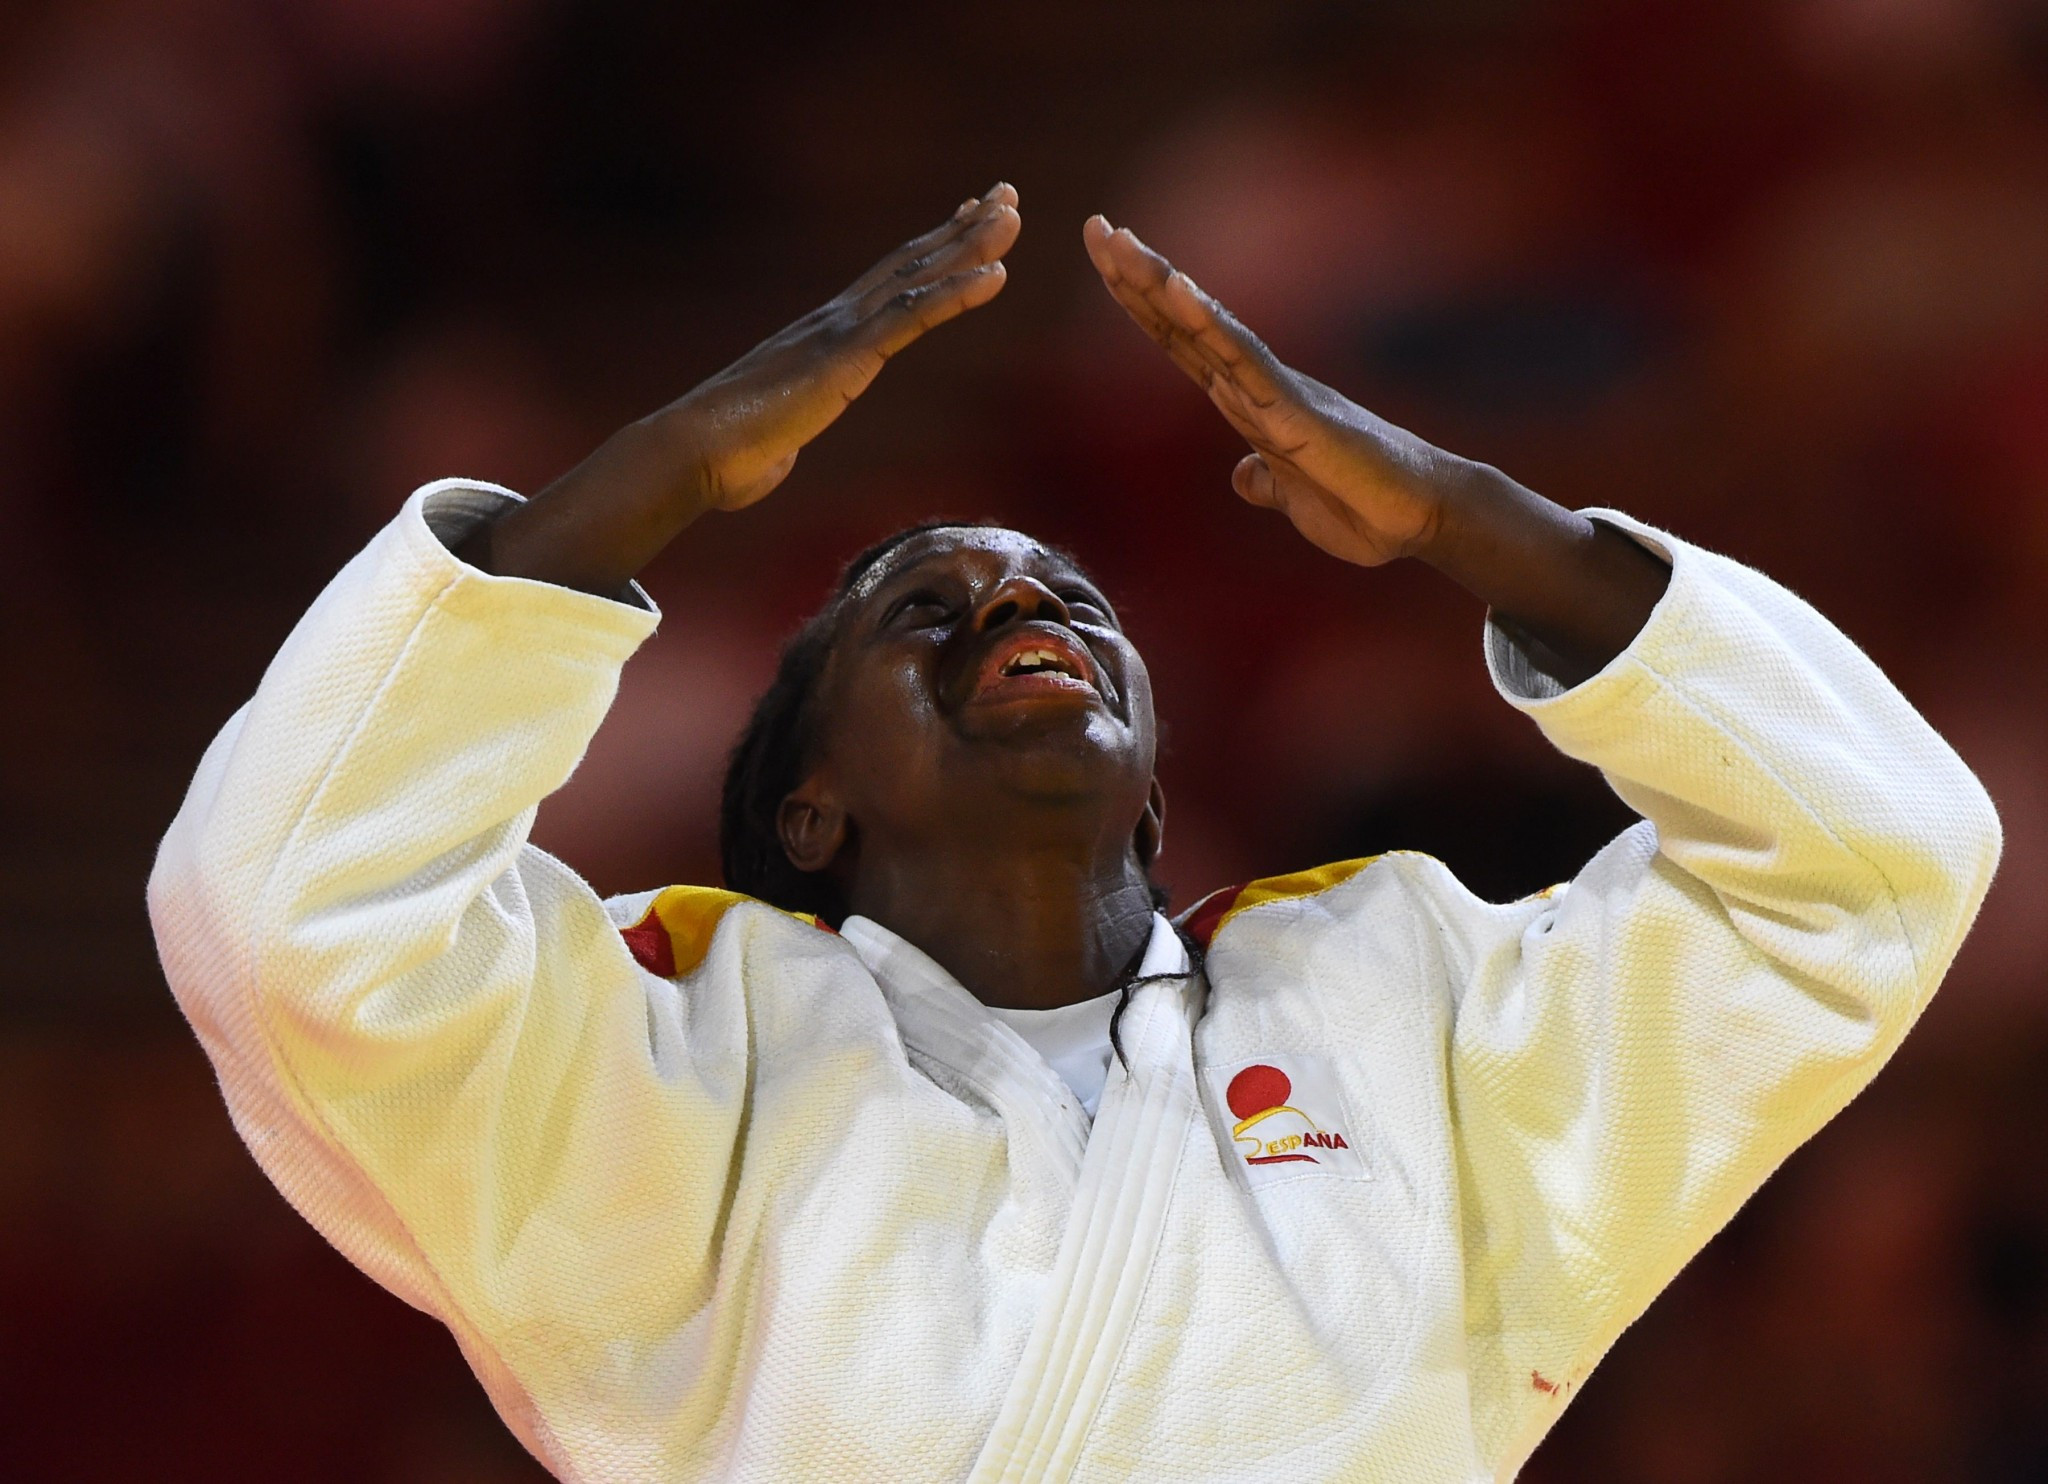 Spain's Maria Bernabeu was delighted with her bronze at under 70kg ©Getty Images